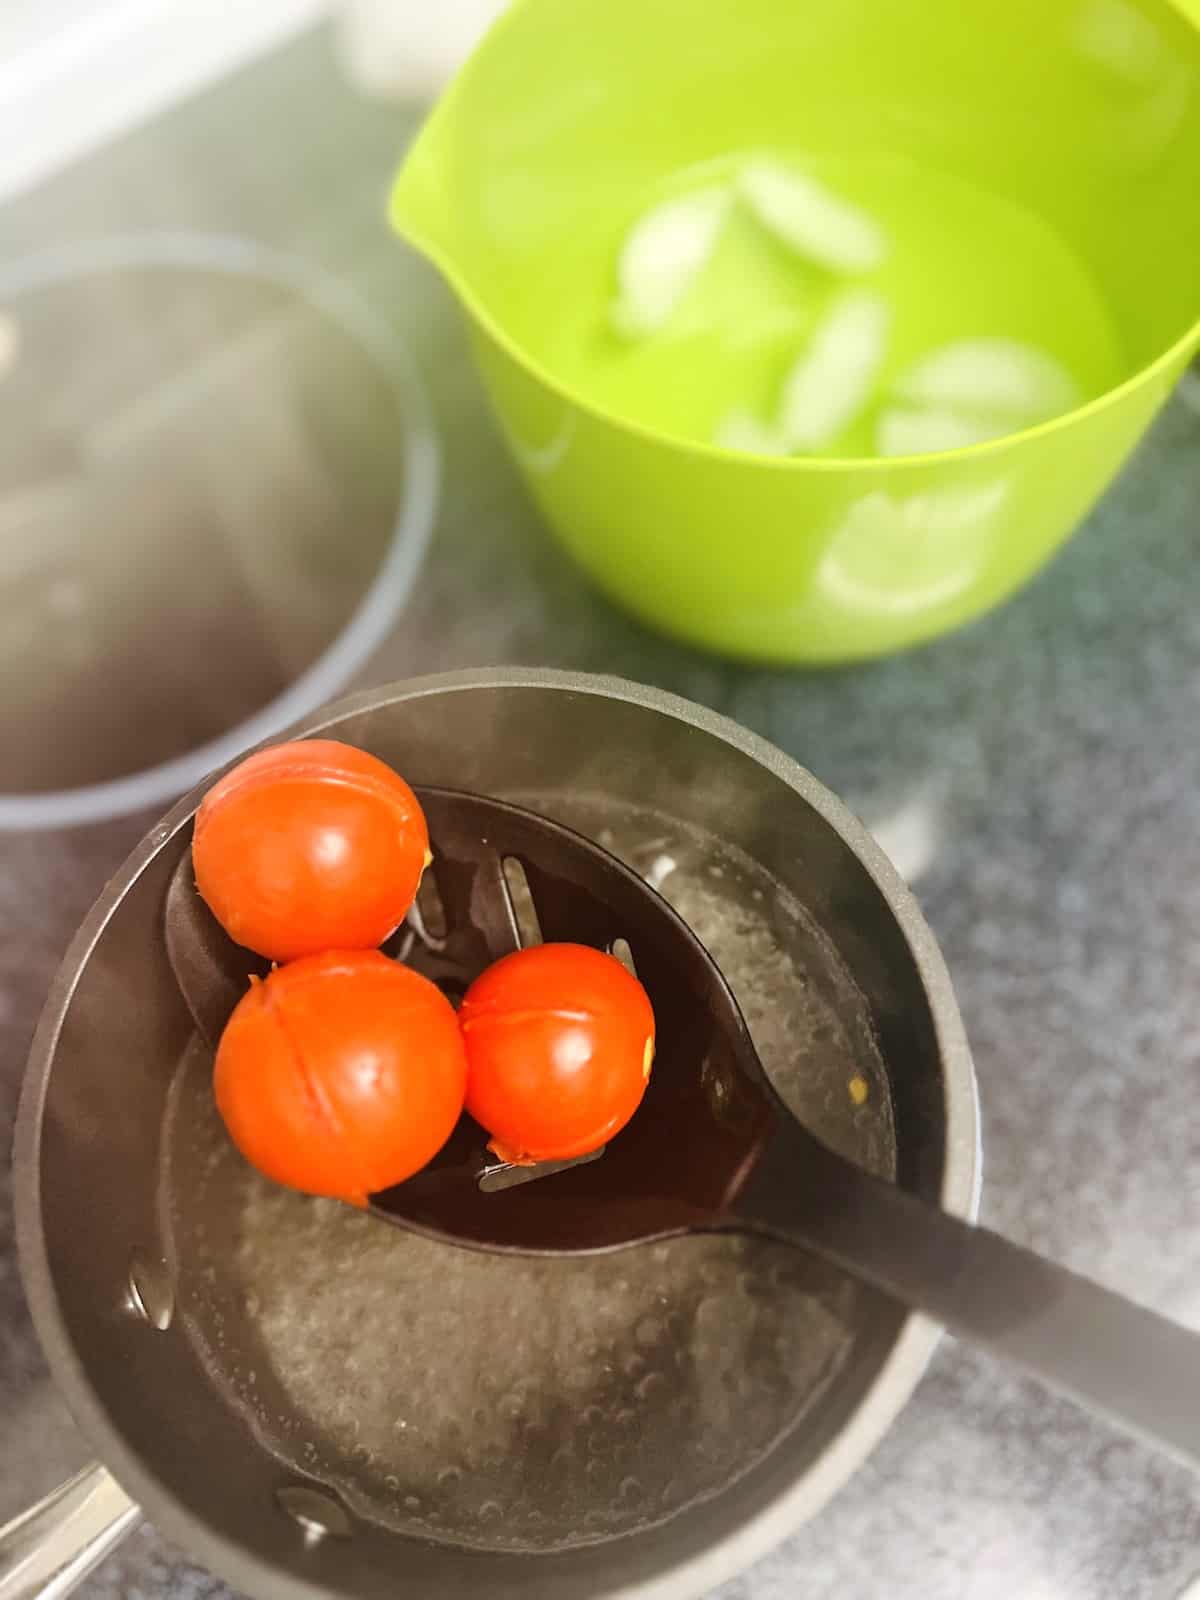 Slotted spoon lifting blanched tomatoes out of simmer pot of water.